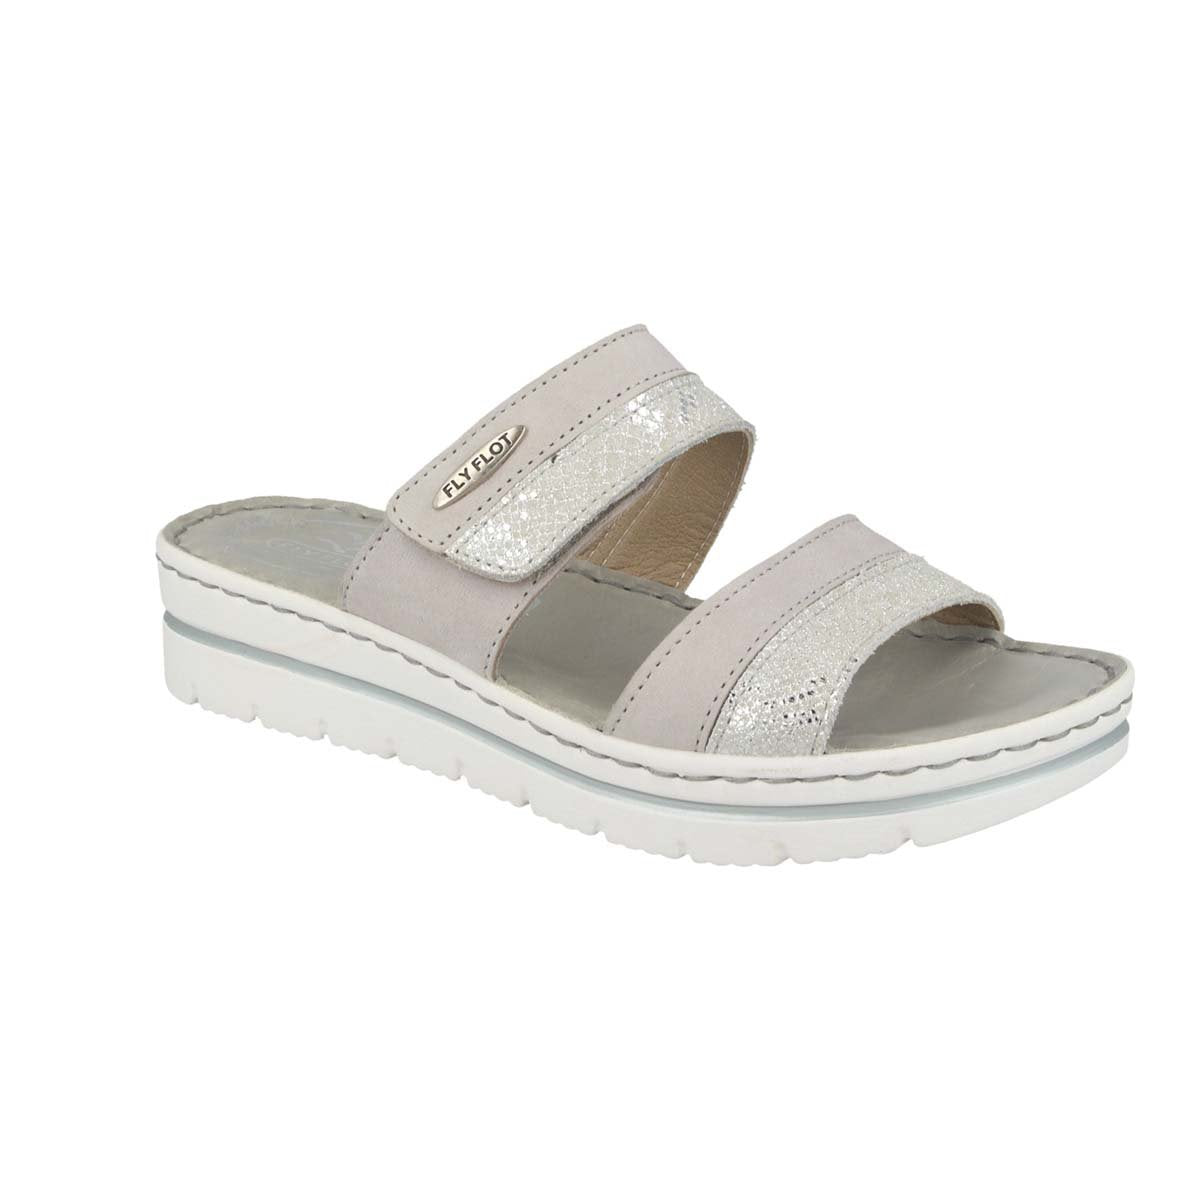 See the Trendy  Leather Slide Women Sandals With Anti-Shock Cushioned Leather Insole in the colour BEIGE, available in various sizes